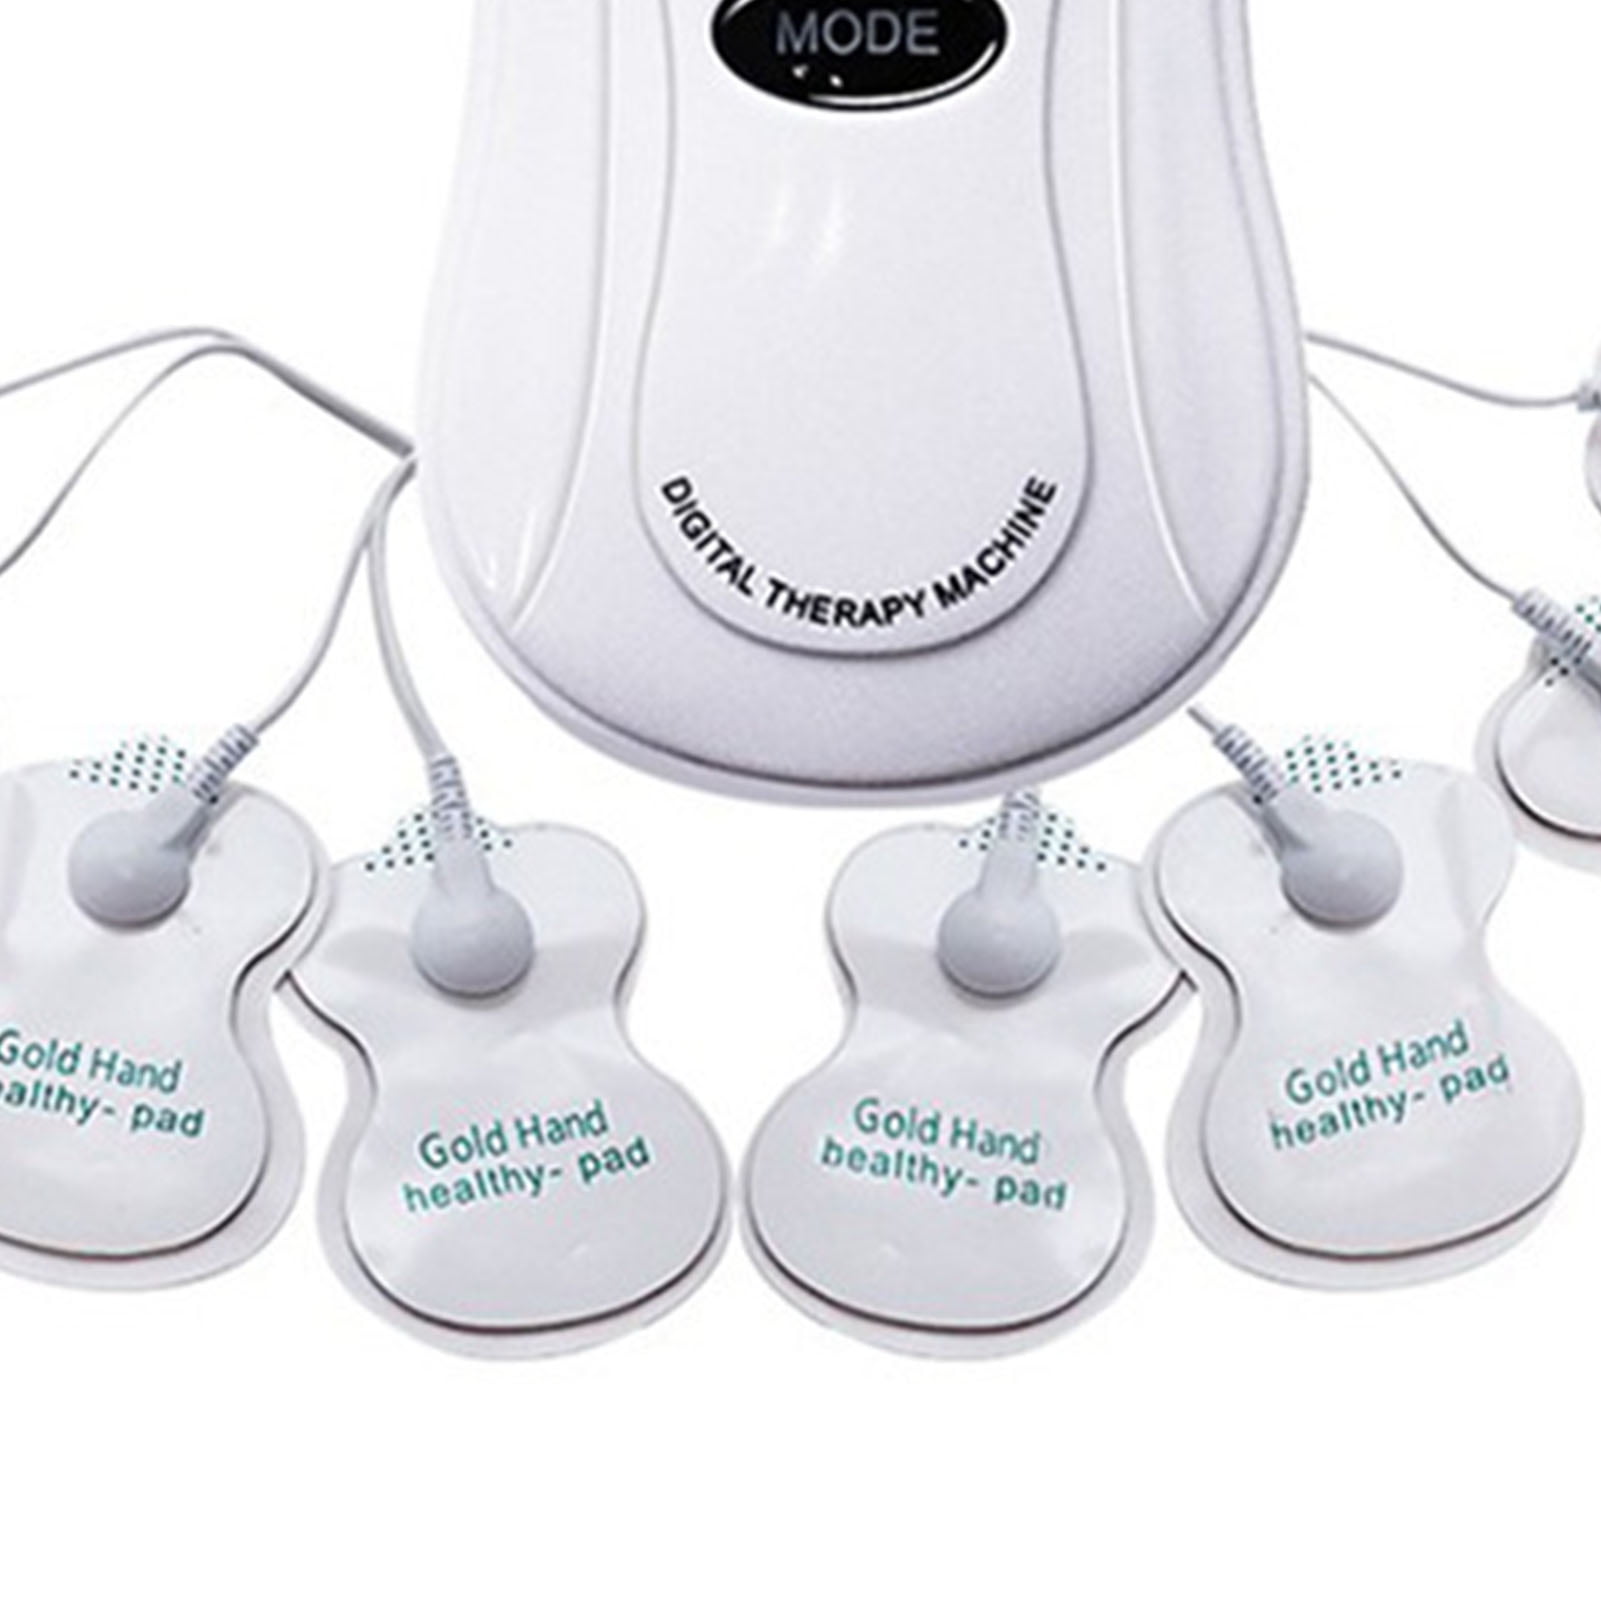 MOMICARE Cordless Low-frequency Pulse Massager - Maxell